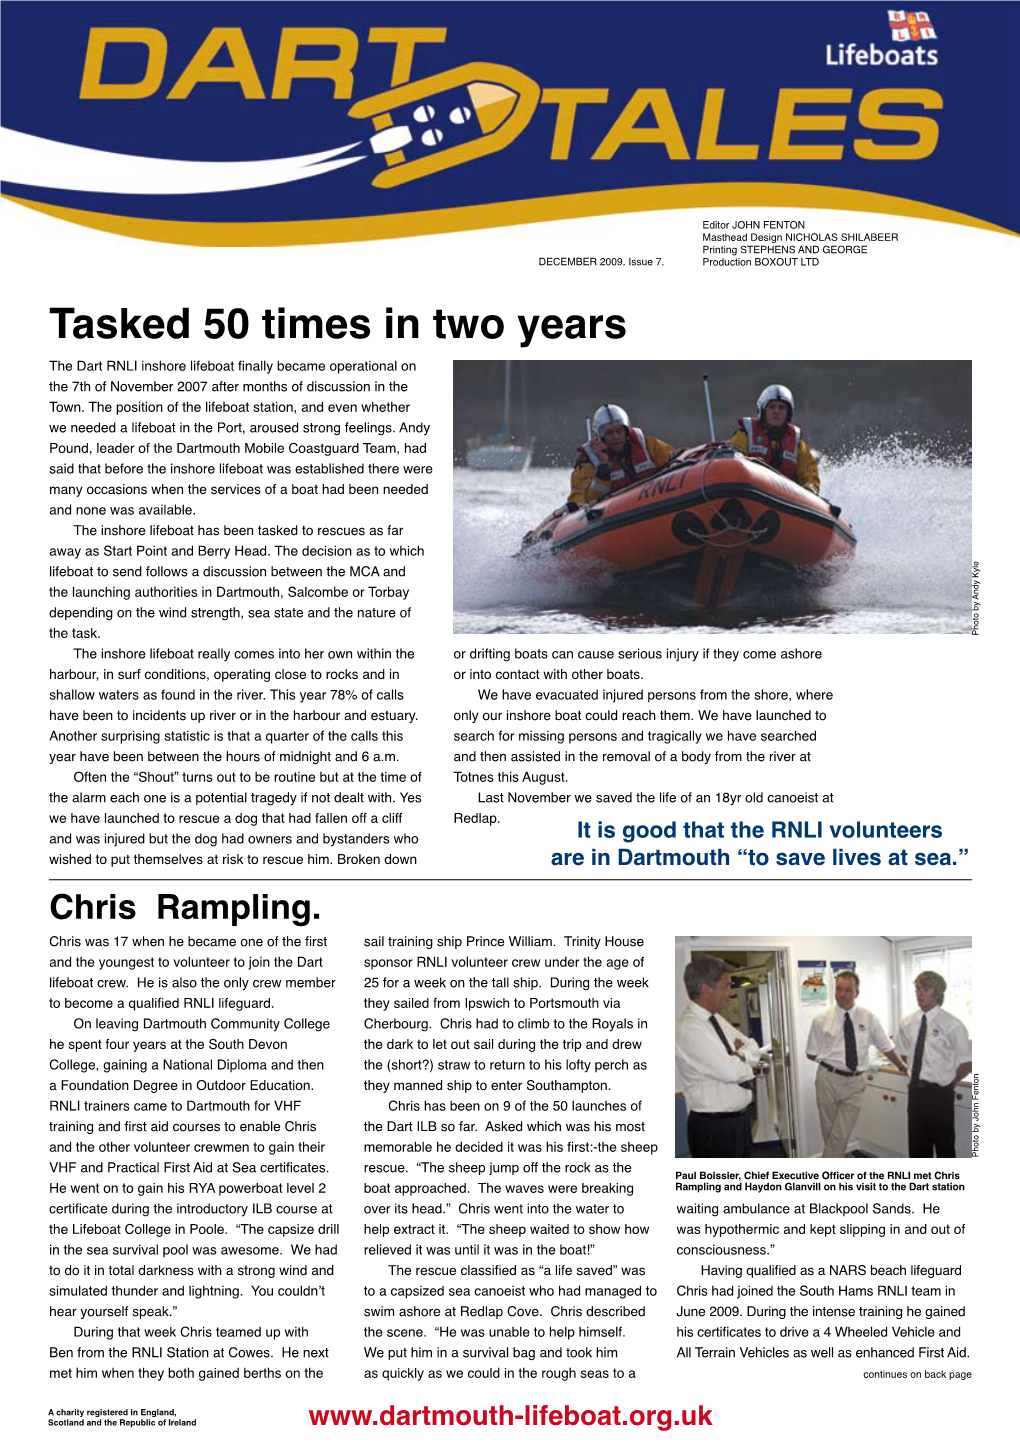 Tasked 50 Times in Two Years the Dart RNLI Inshore Lifeboat Finally Became Operational on the 7Th of November 2007 After Months of Discussion in the Town